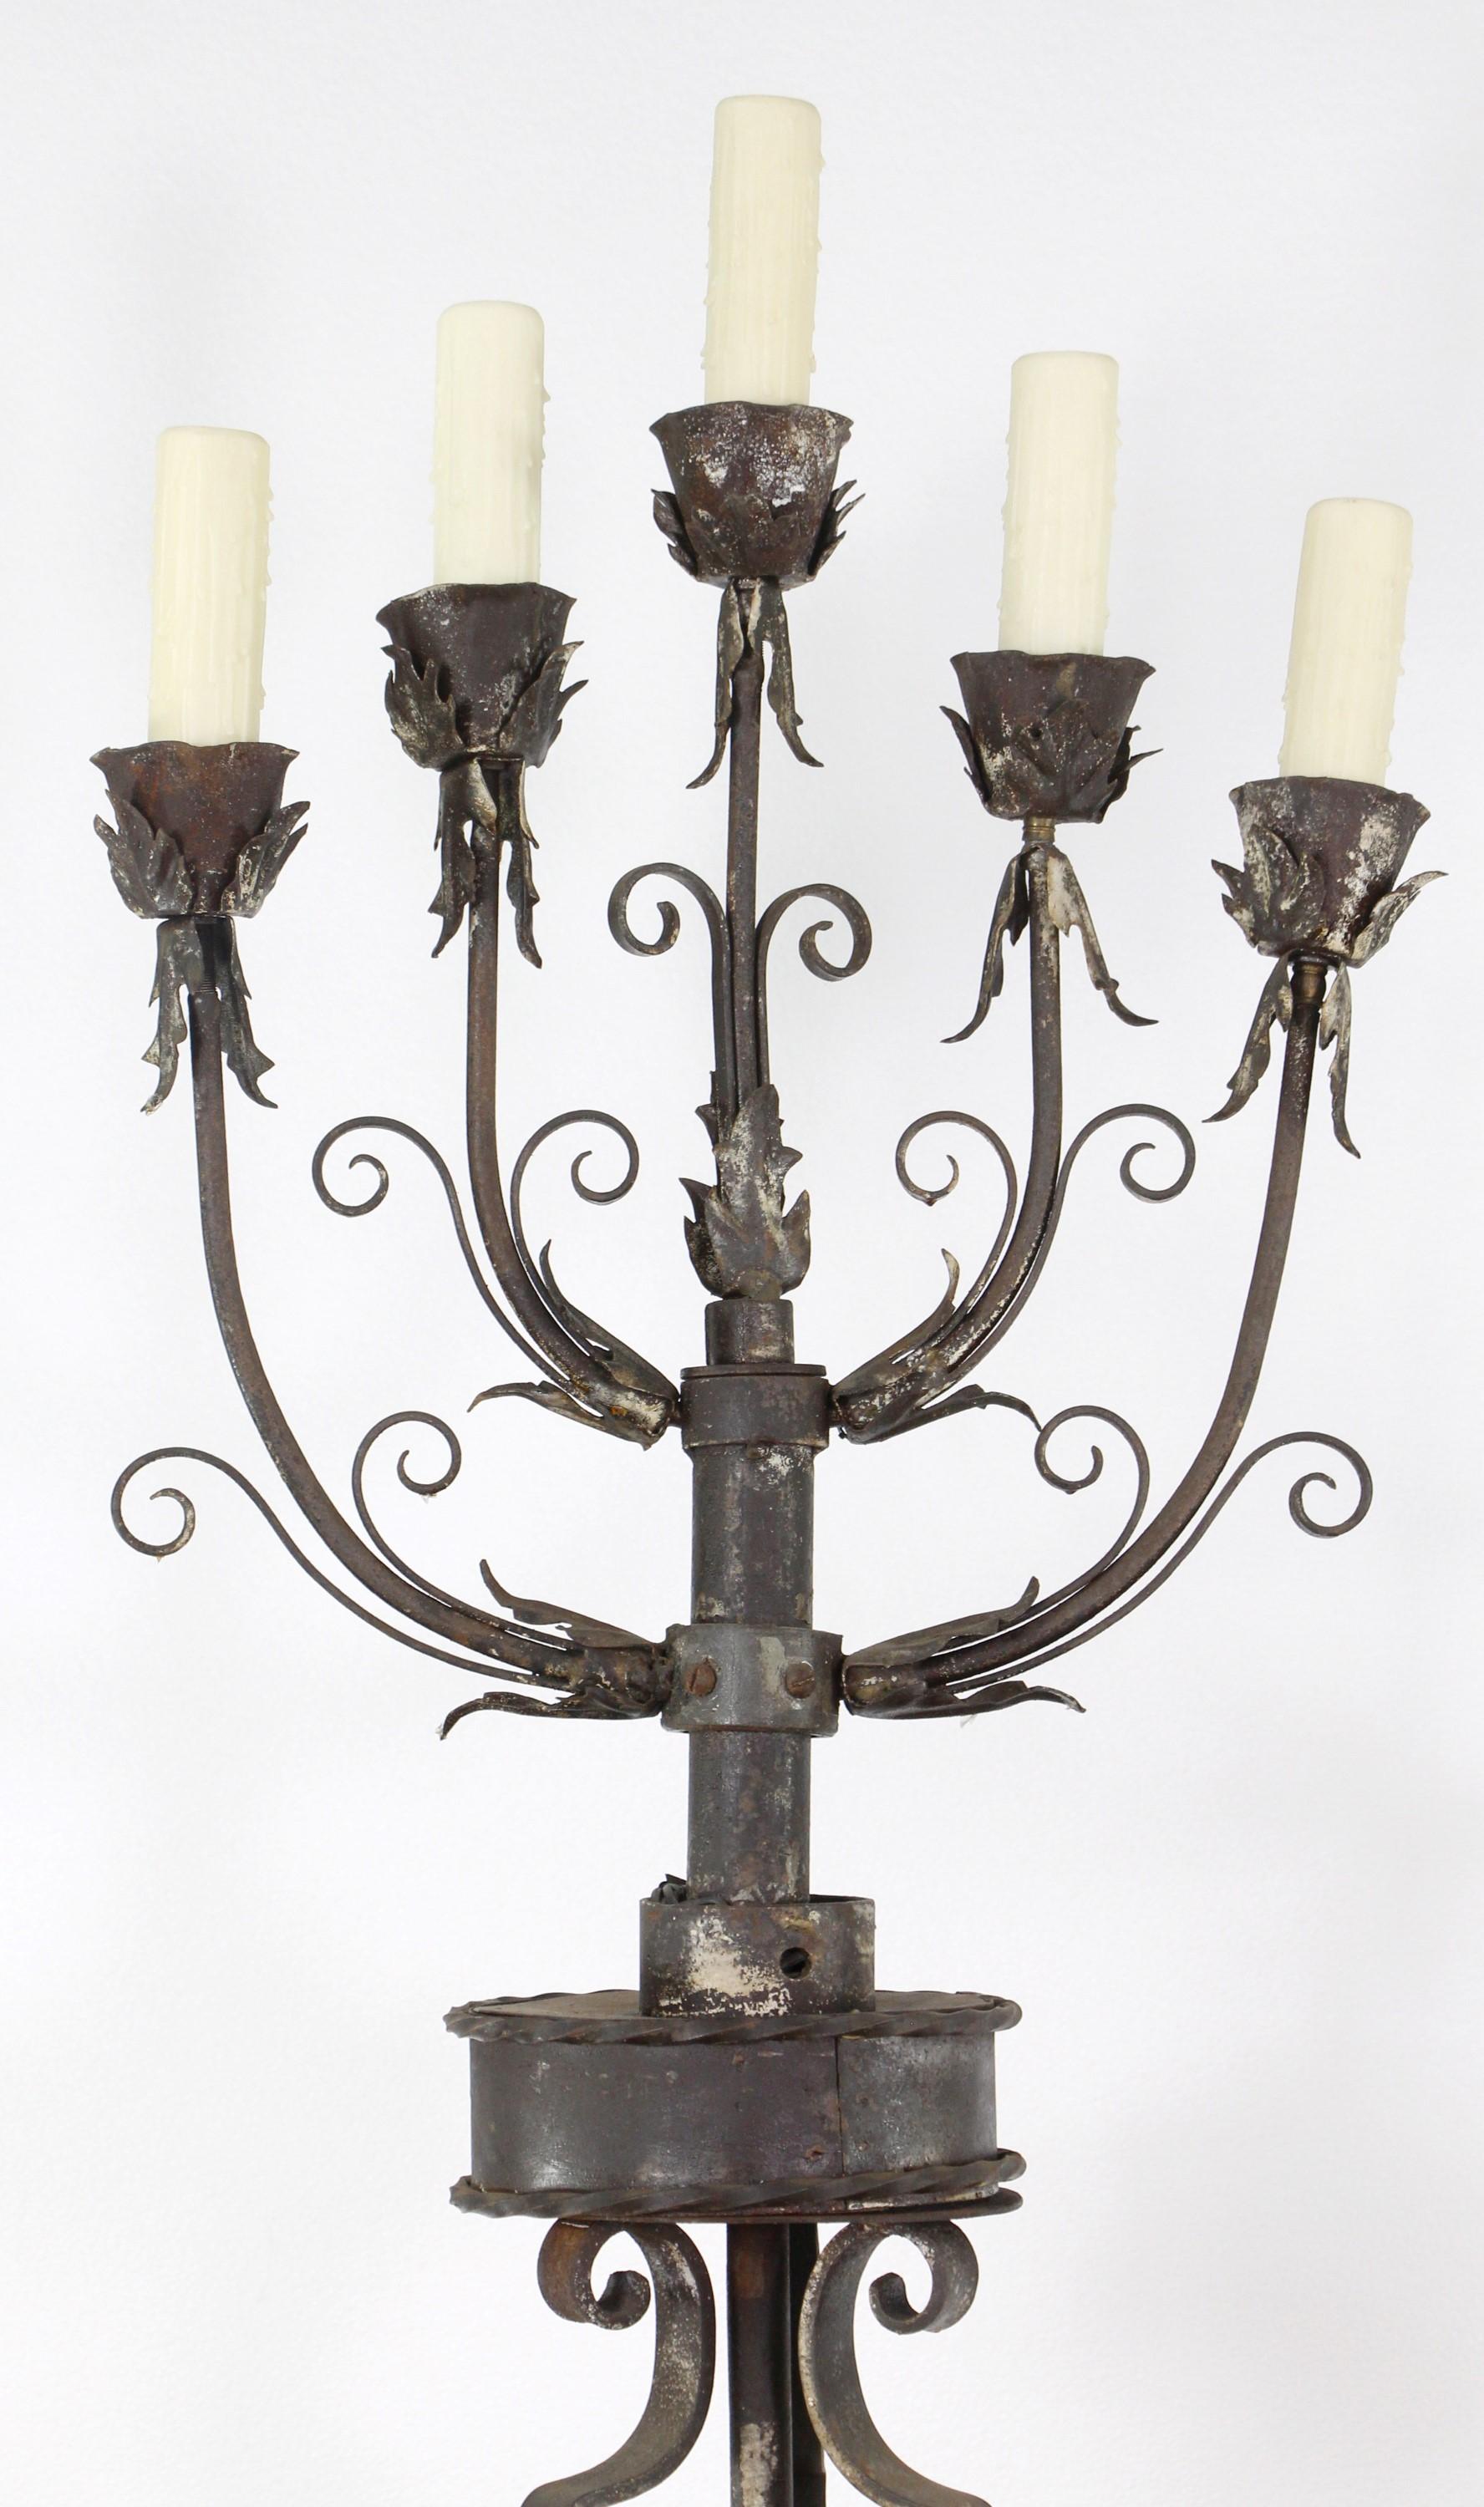 Over the top 19th Century pair of candelabra floor lamps. Hand wrought iron with Floral and leaf details. Handmade with bands and pinned together. Now restored and electrified. Each floor lamp has 5 sockets. Priced as a pair. This can be seen at our